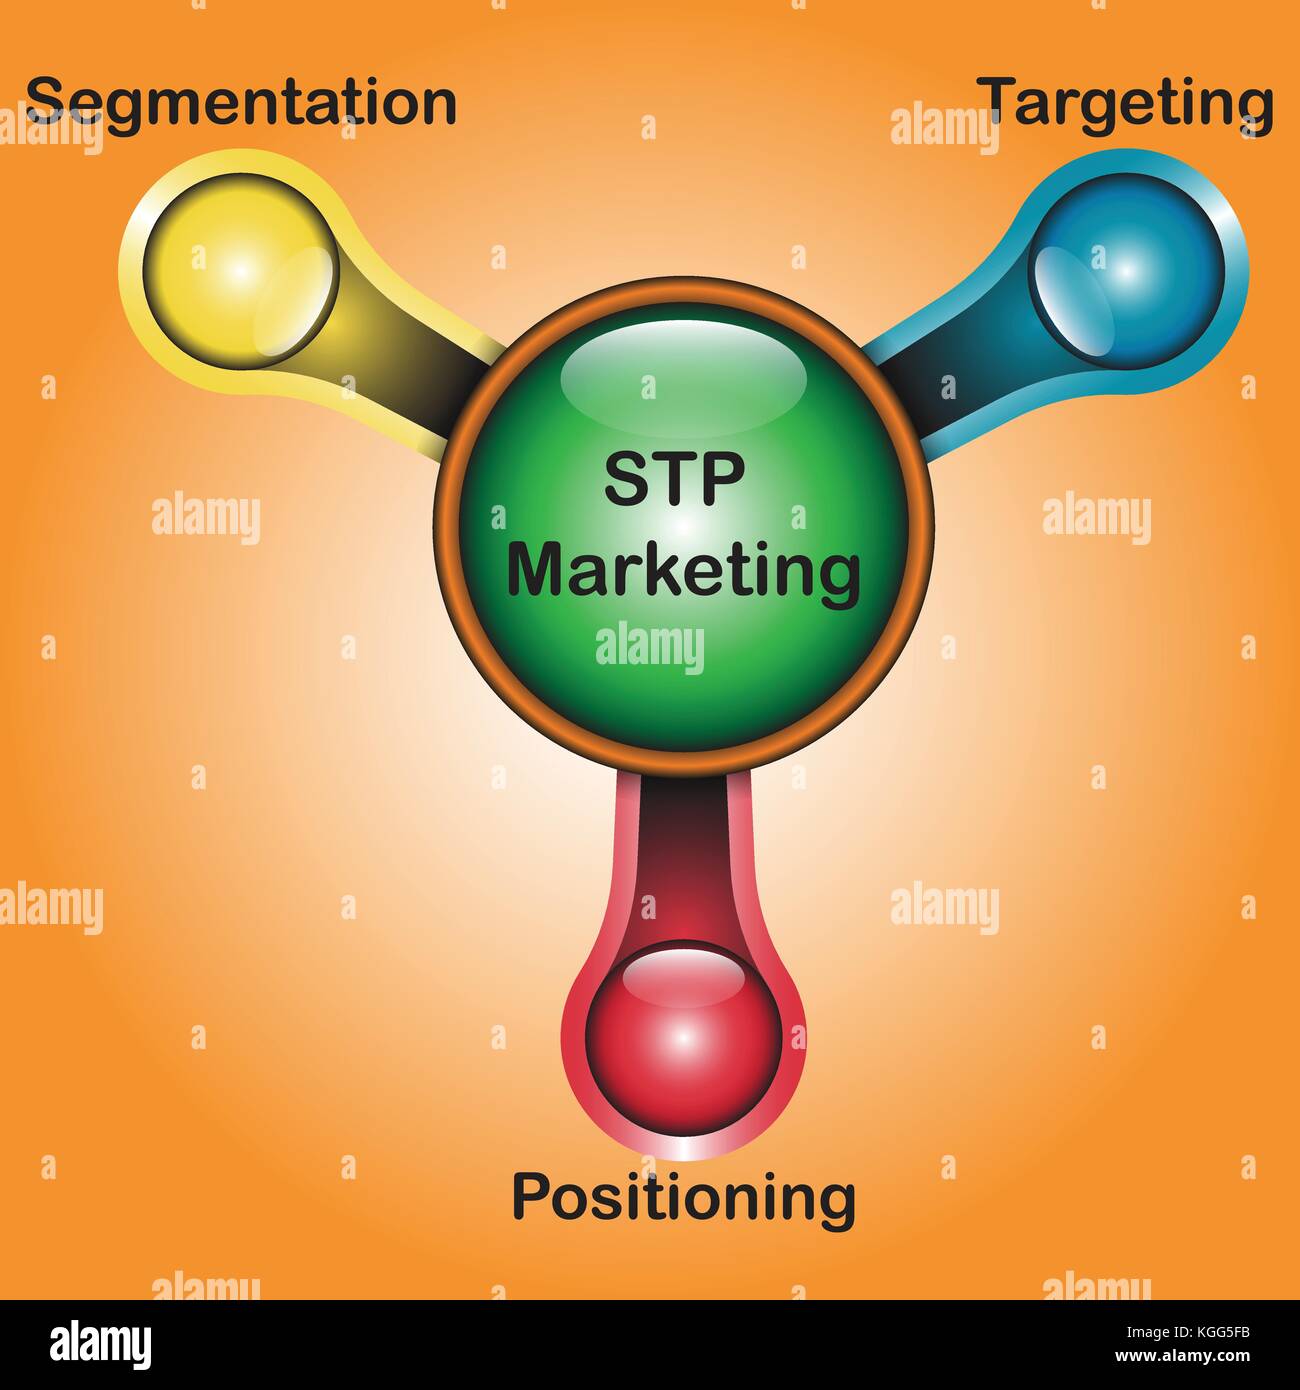 Vector Illustration Plan And Model Of STP Marketing Diagram Means Segmentation, Targeting, And Positioning Designed As Look-Alike Water Tap